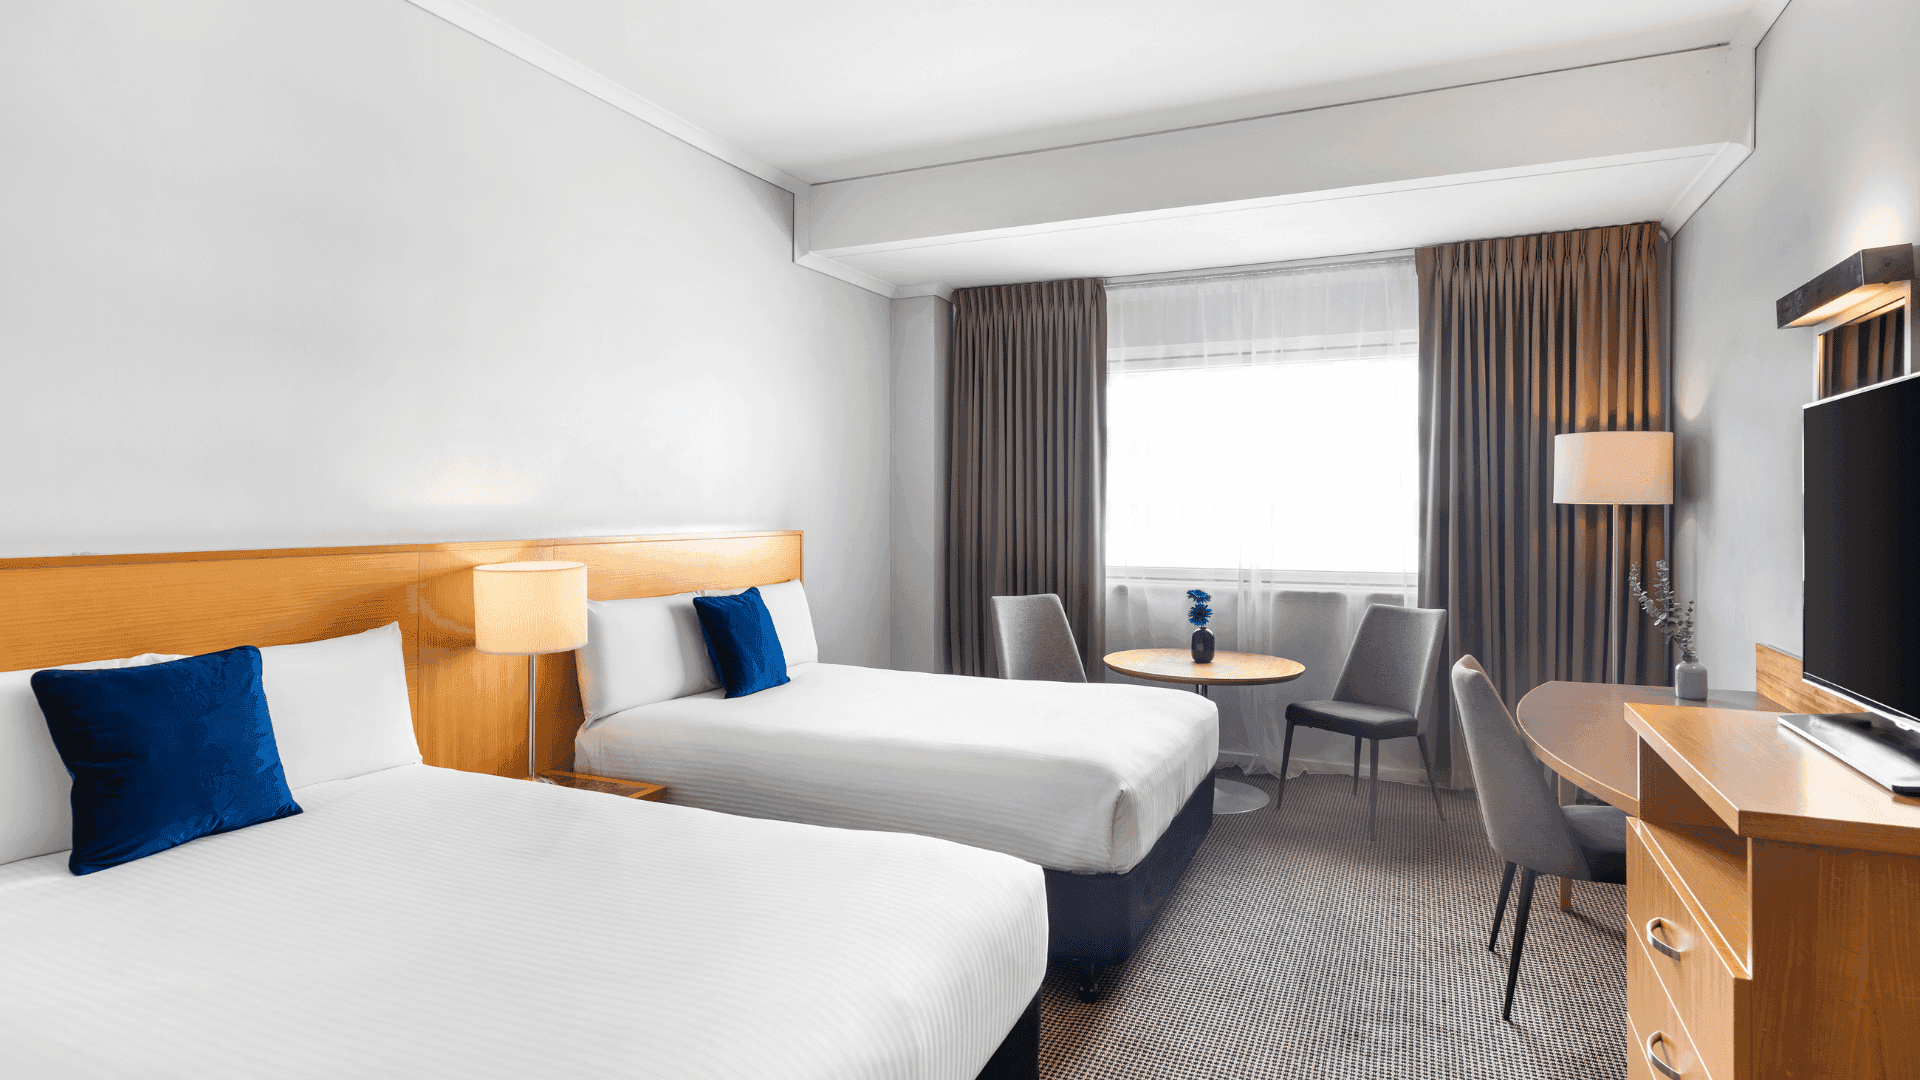 Novotel Perth Langley's standard double room, queen and double bed or twins double beds with large window